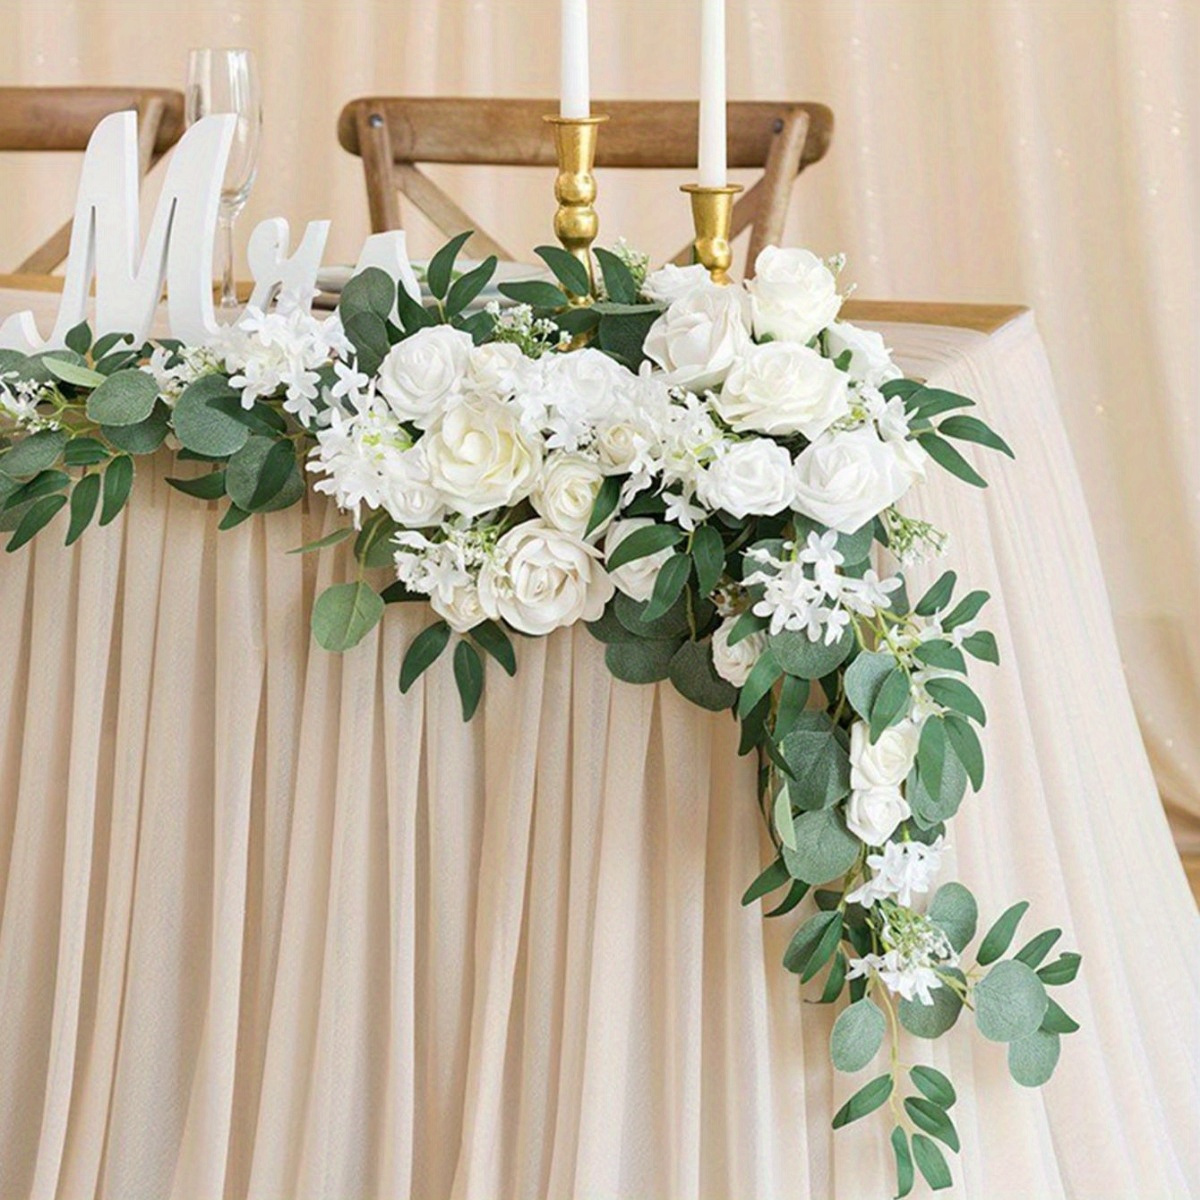 

2 Packs 6.5ft Artificial Eucalyptus Garland With , Spring Greenery Garland Fake Silver Dollar Eucalyptus Vines For Centerpieces Table Runner Wedding Arch Home Bridal Baby Shower Decor